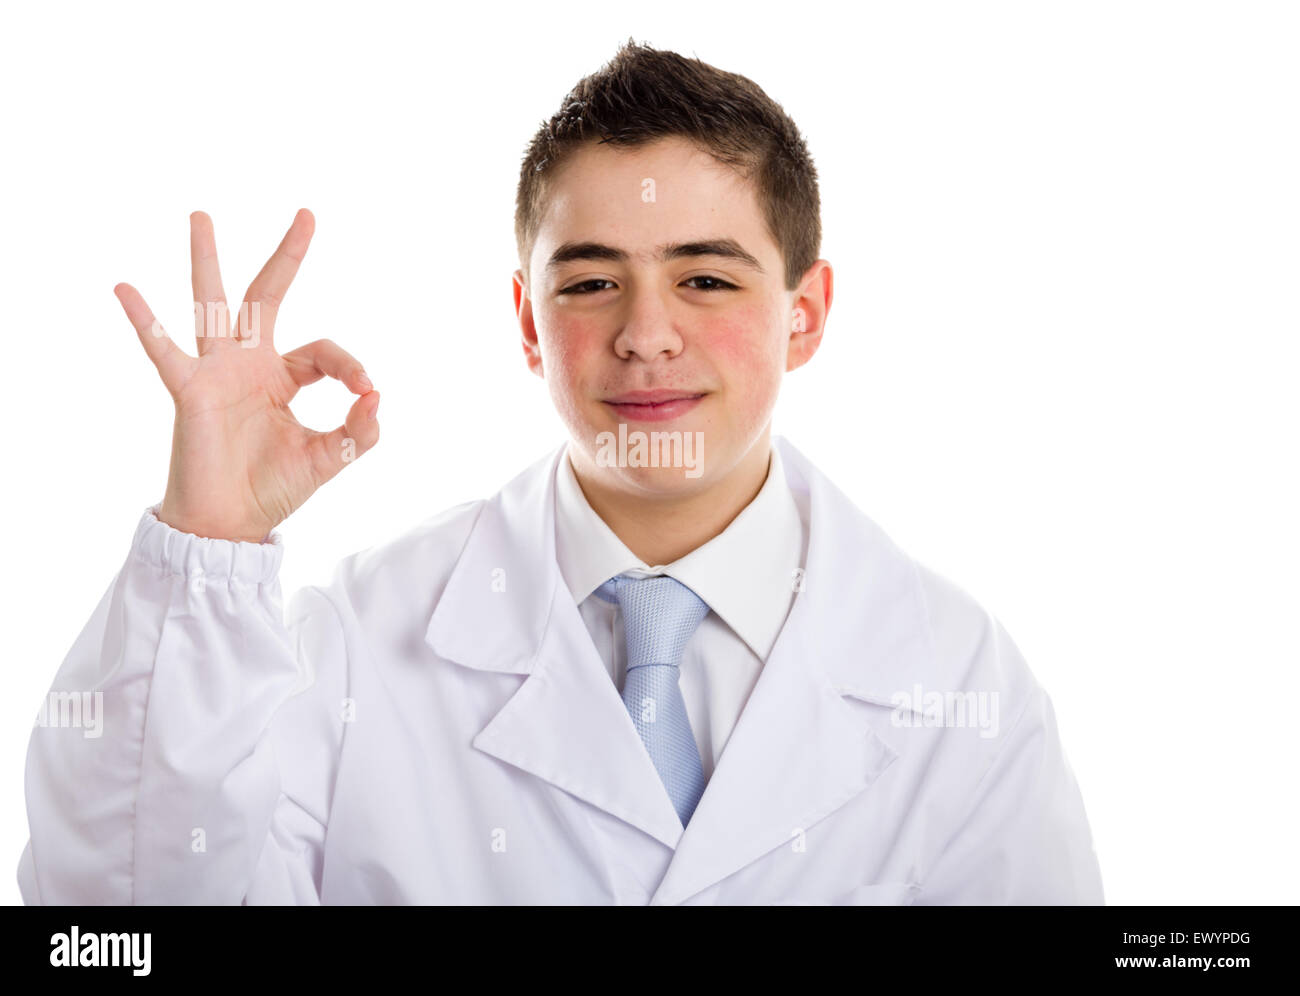 A boy doctor in white coat and blue tie helps to feel medicine more friendly: he is making OK sign. His acne skin has not ben retouched Stock Photo